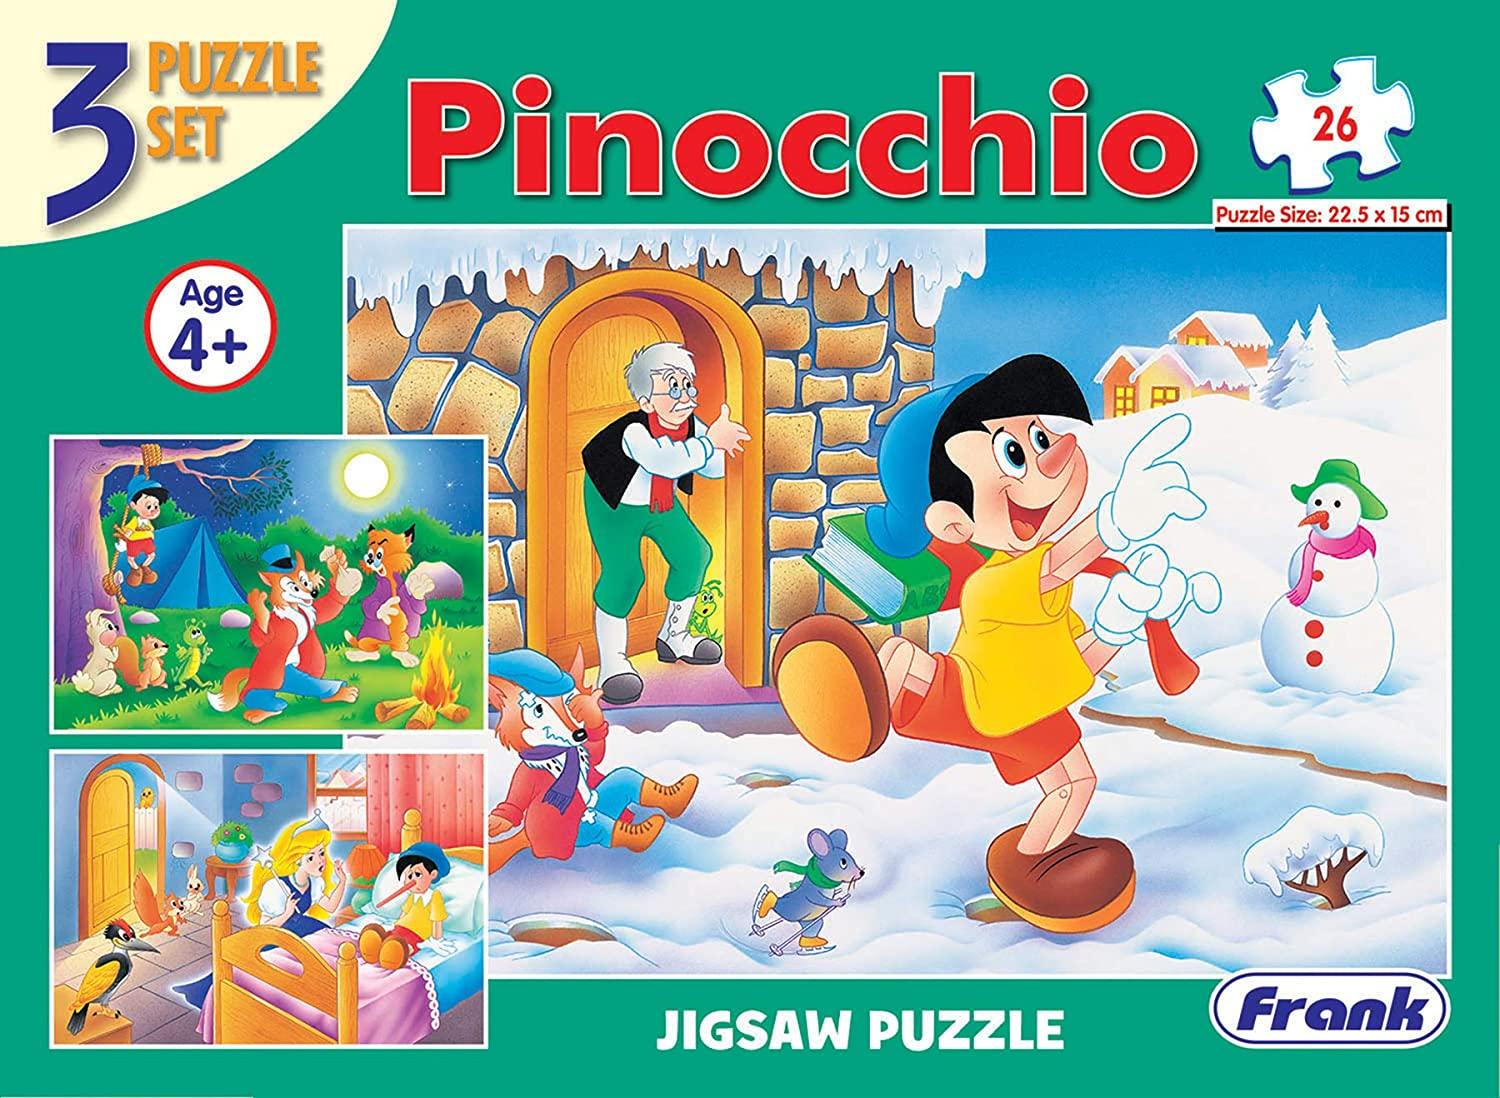 Frank Pinocchio 3 in 1 Puzzle - A Set of 3 26 Pc Jigsaw Puzzles for 4 Year Old Kids and Above